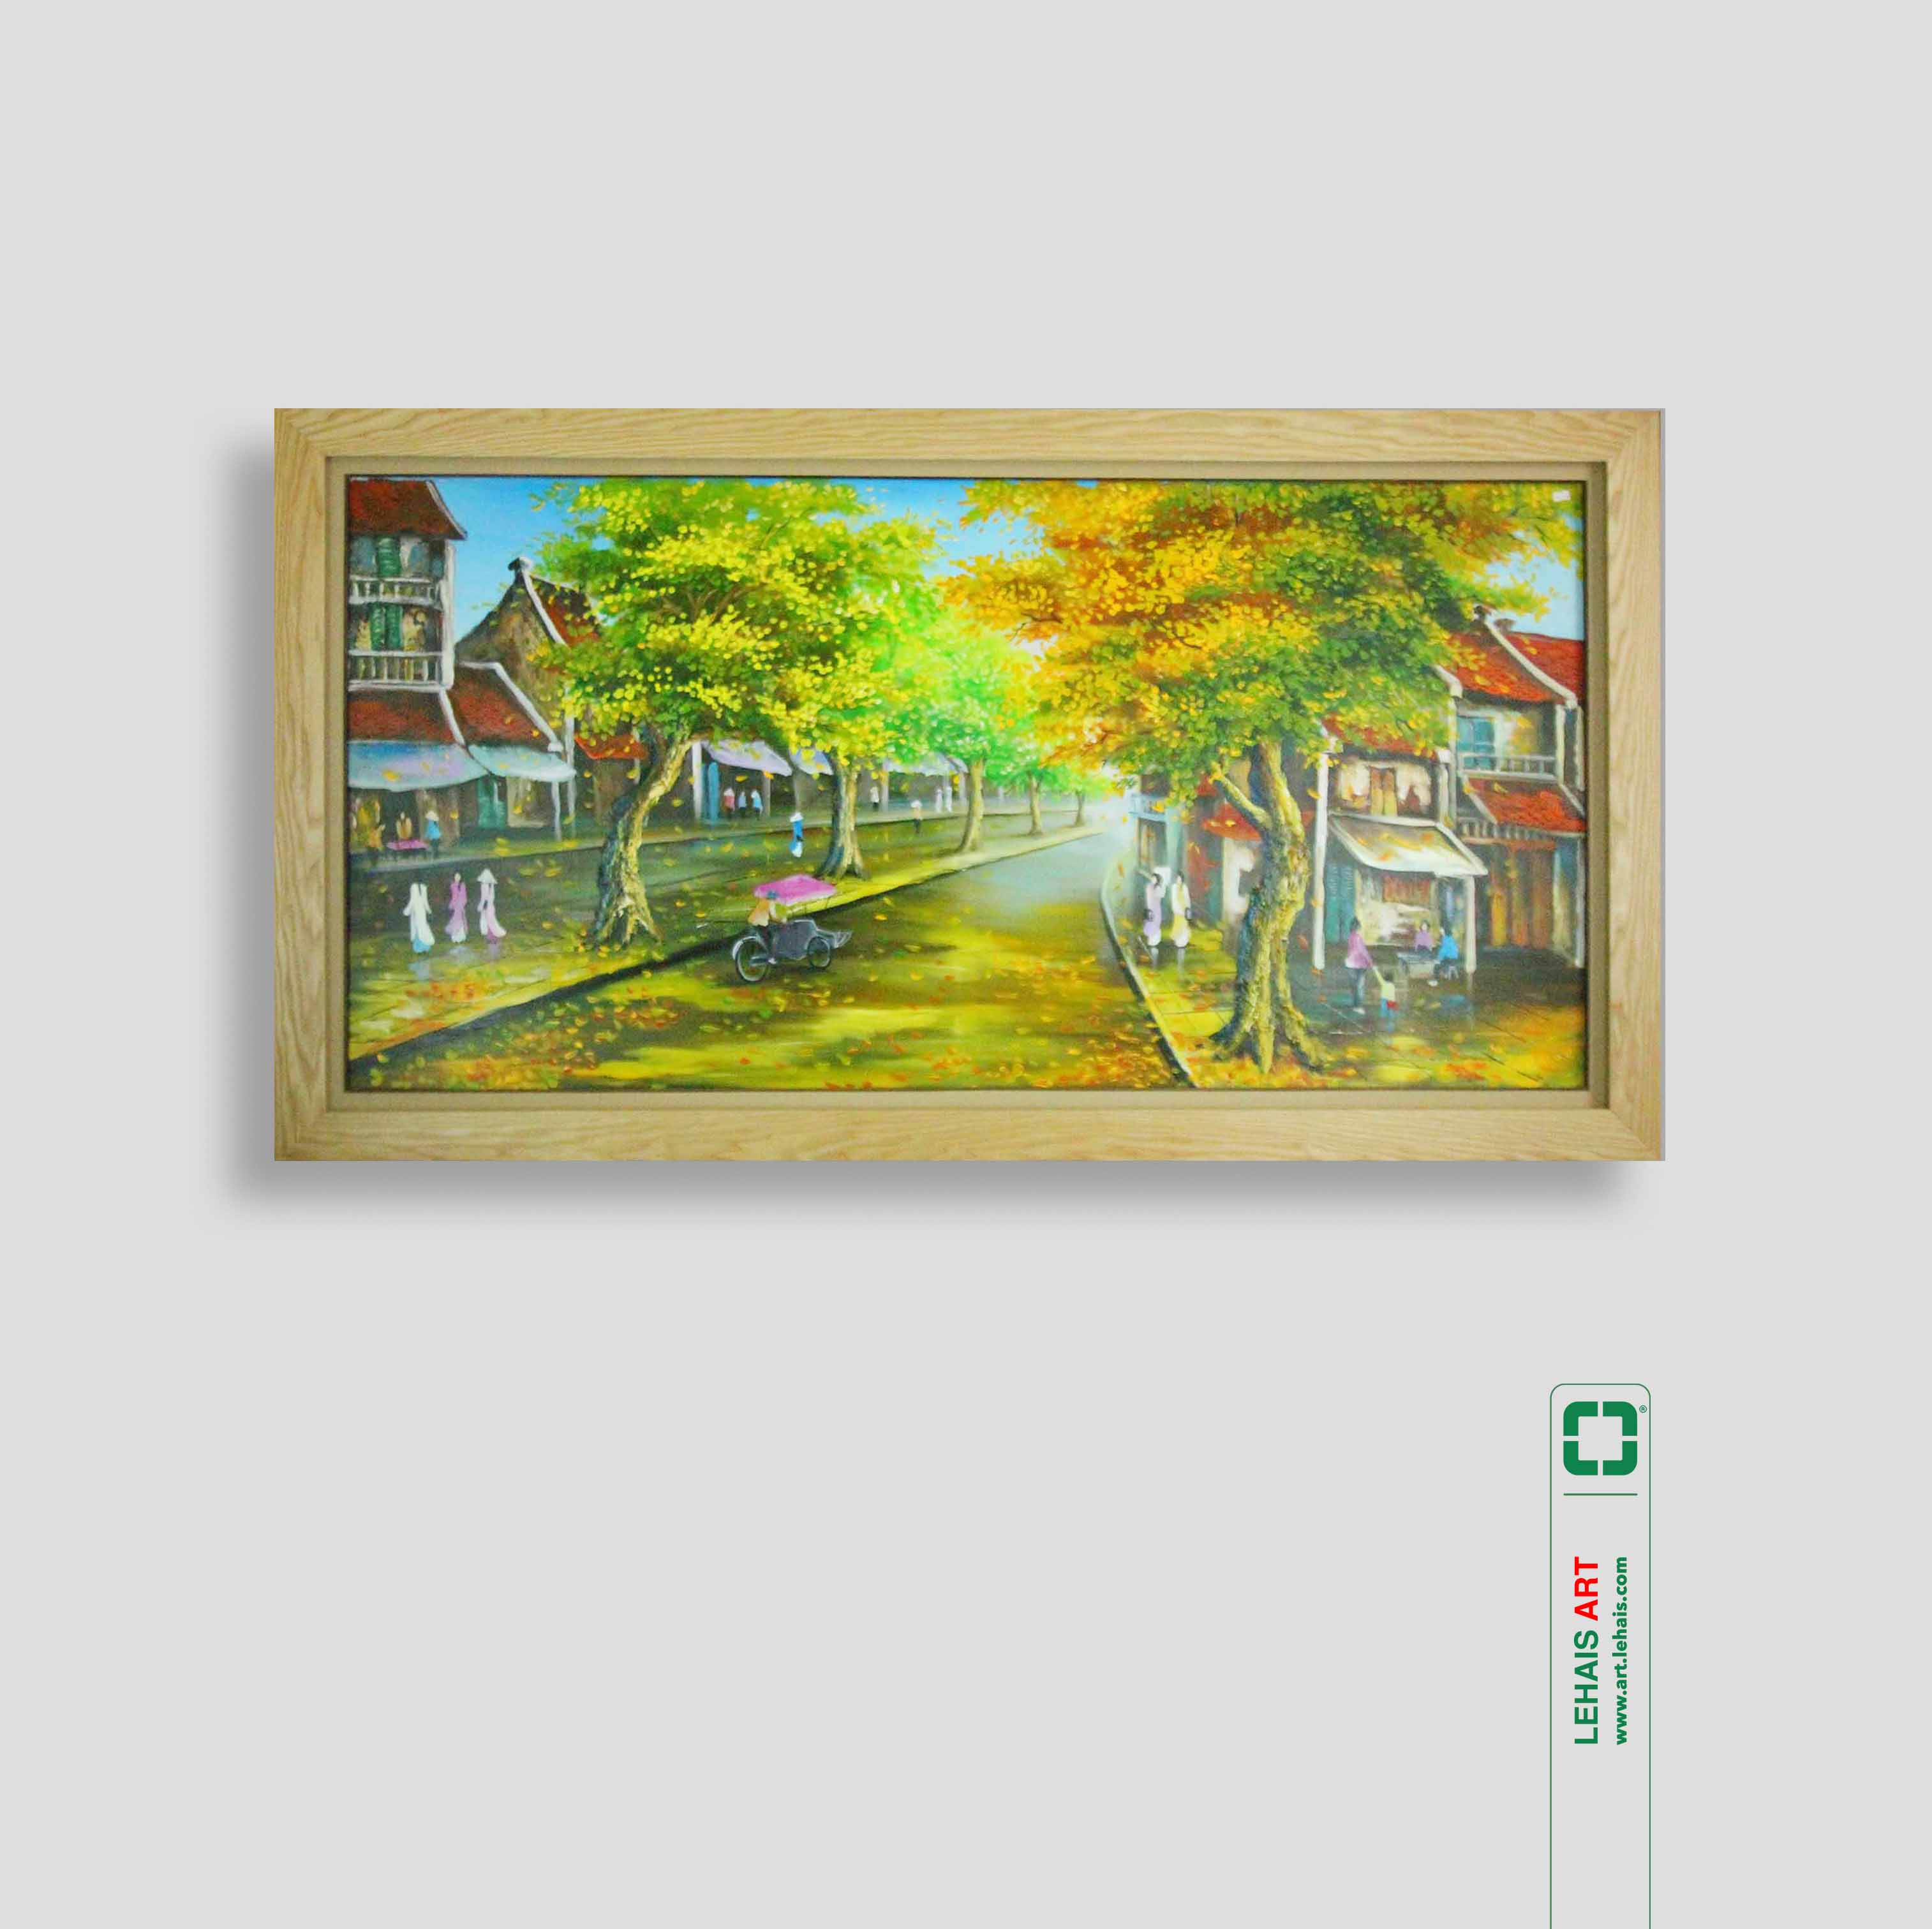 Oil painting of Old town - TSD44LHAR